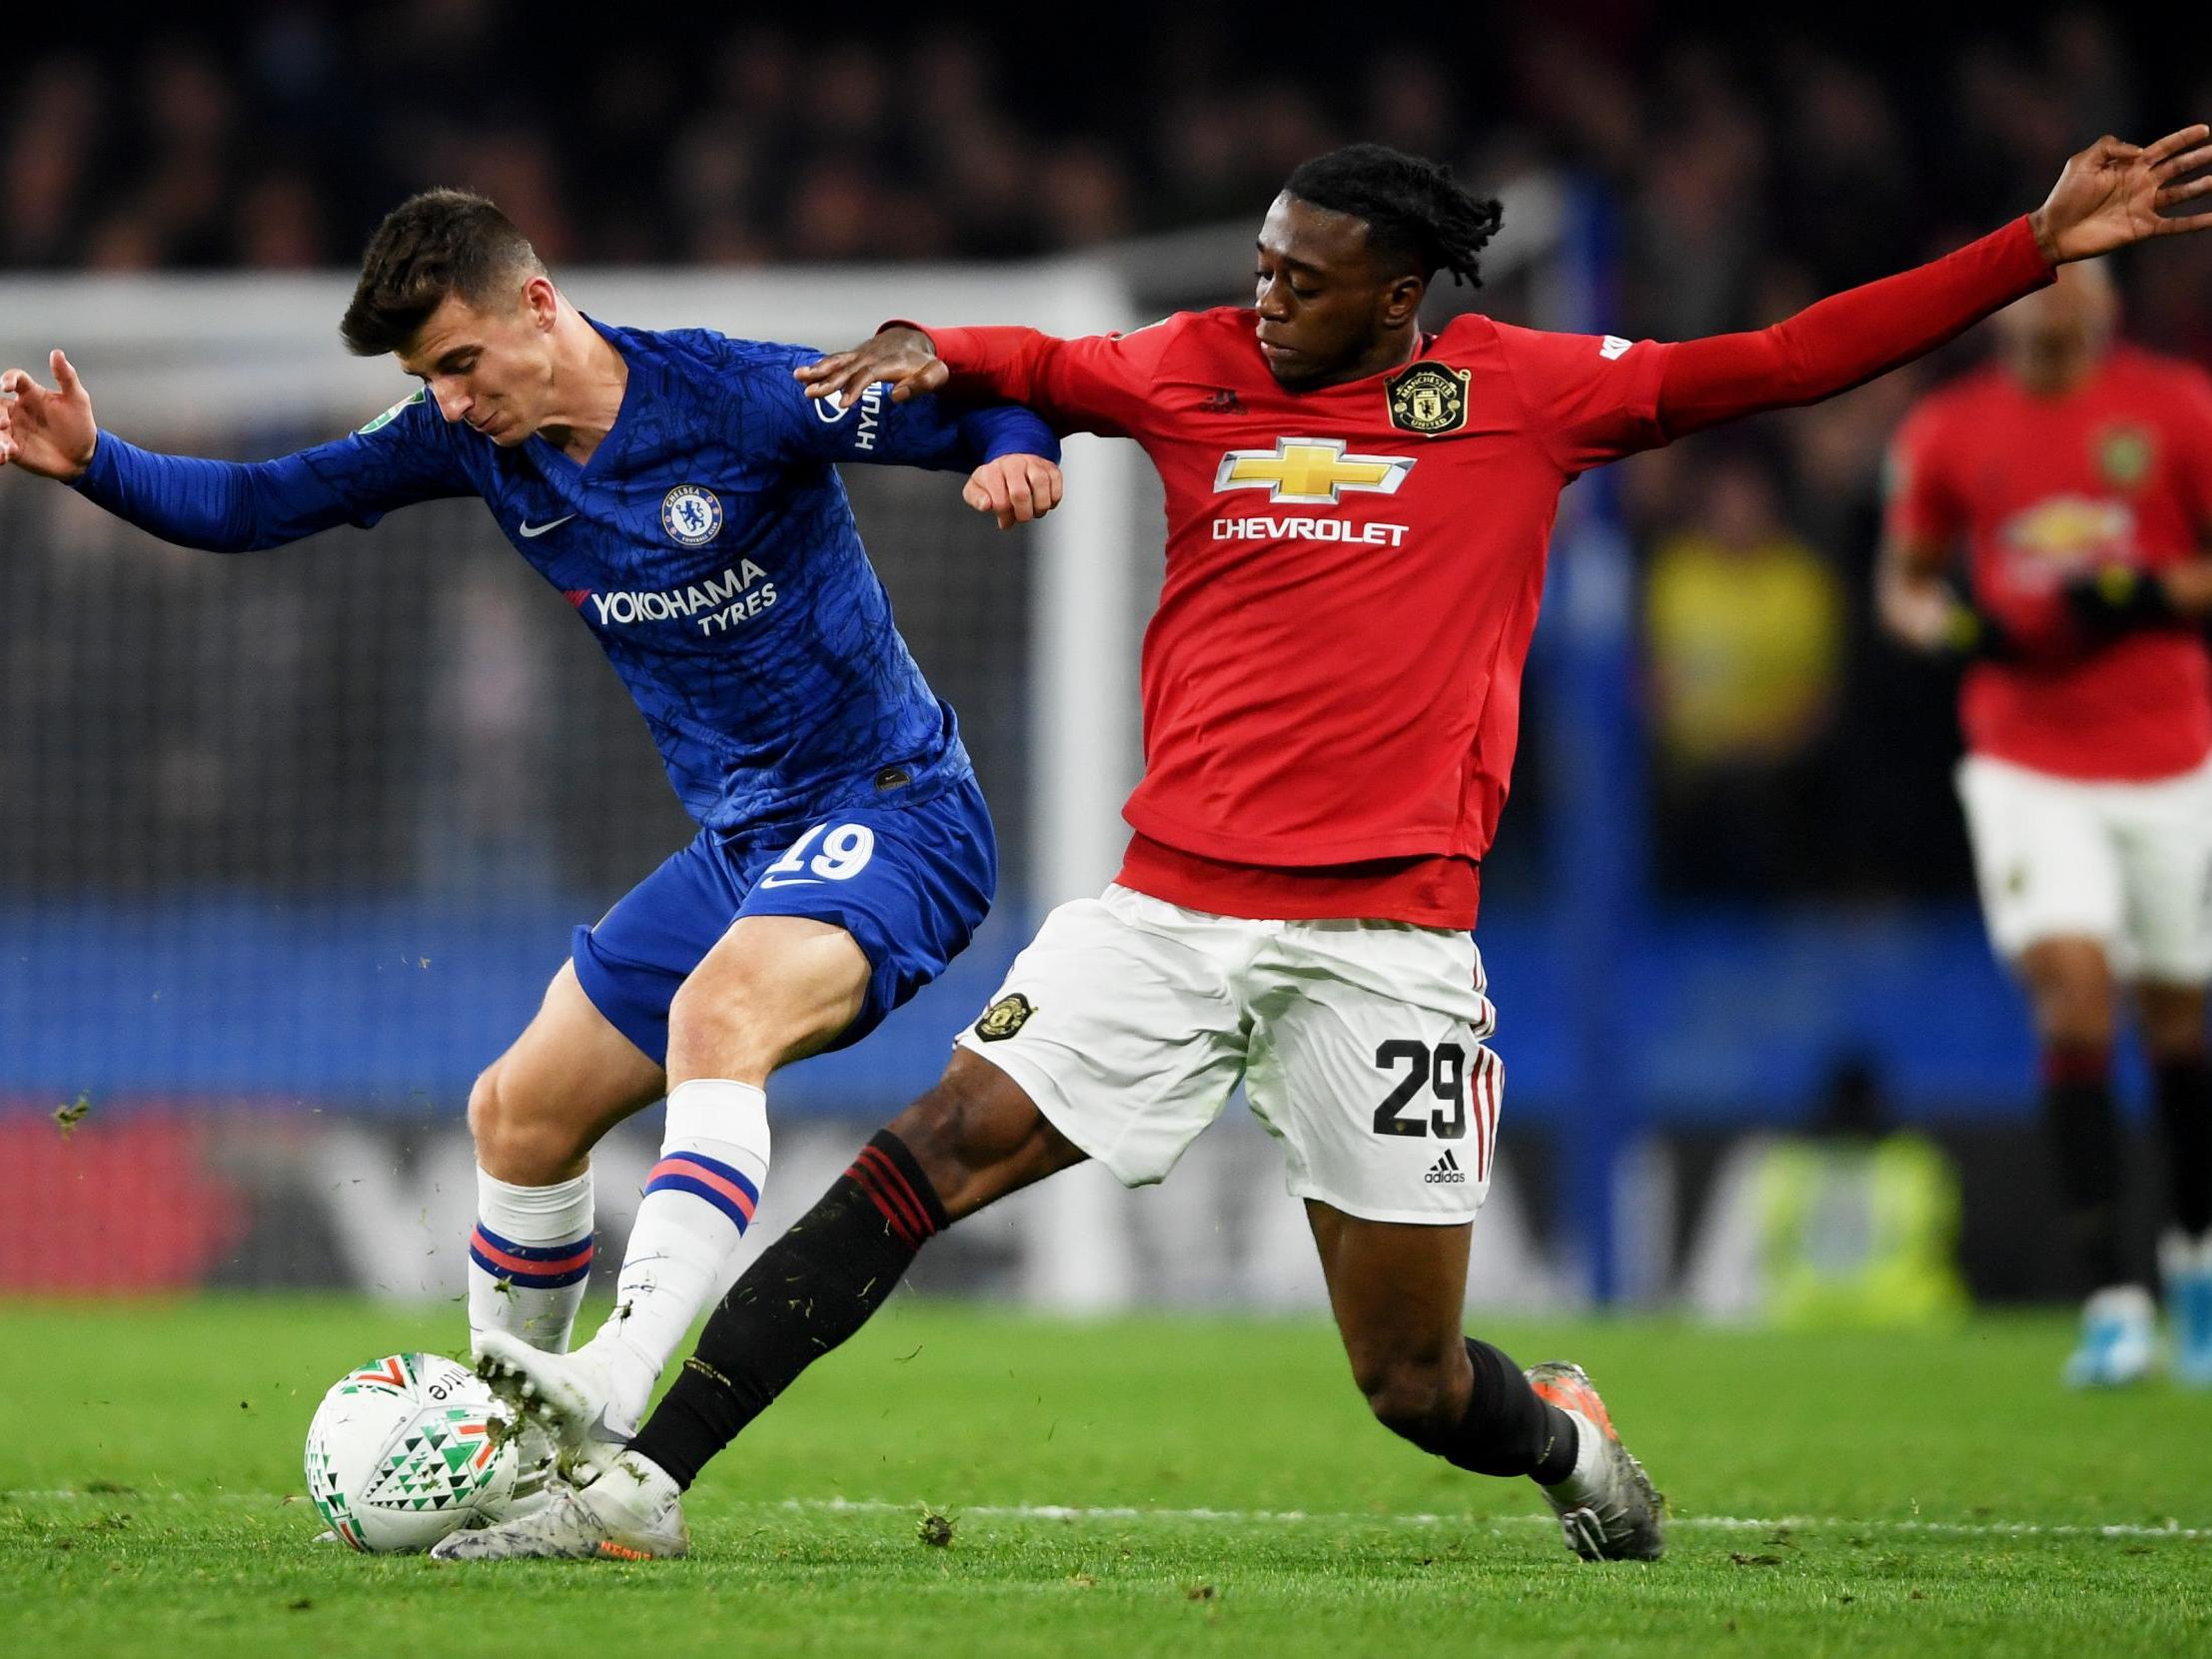 Chelsea vs Manchester United predicted line-ups: Team news ahead of